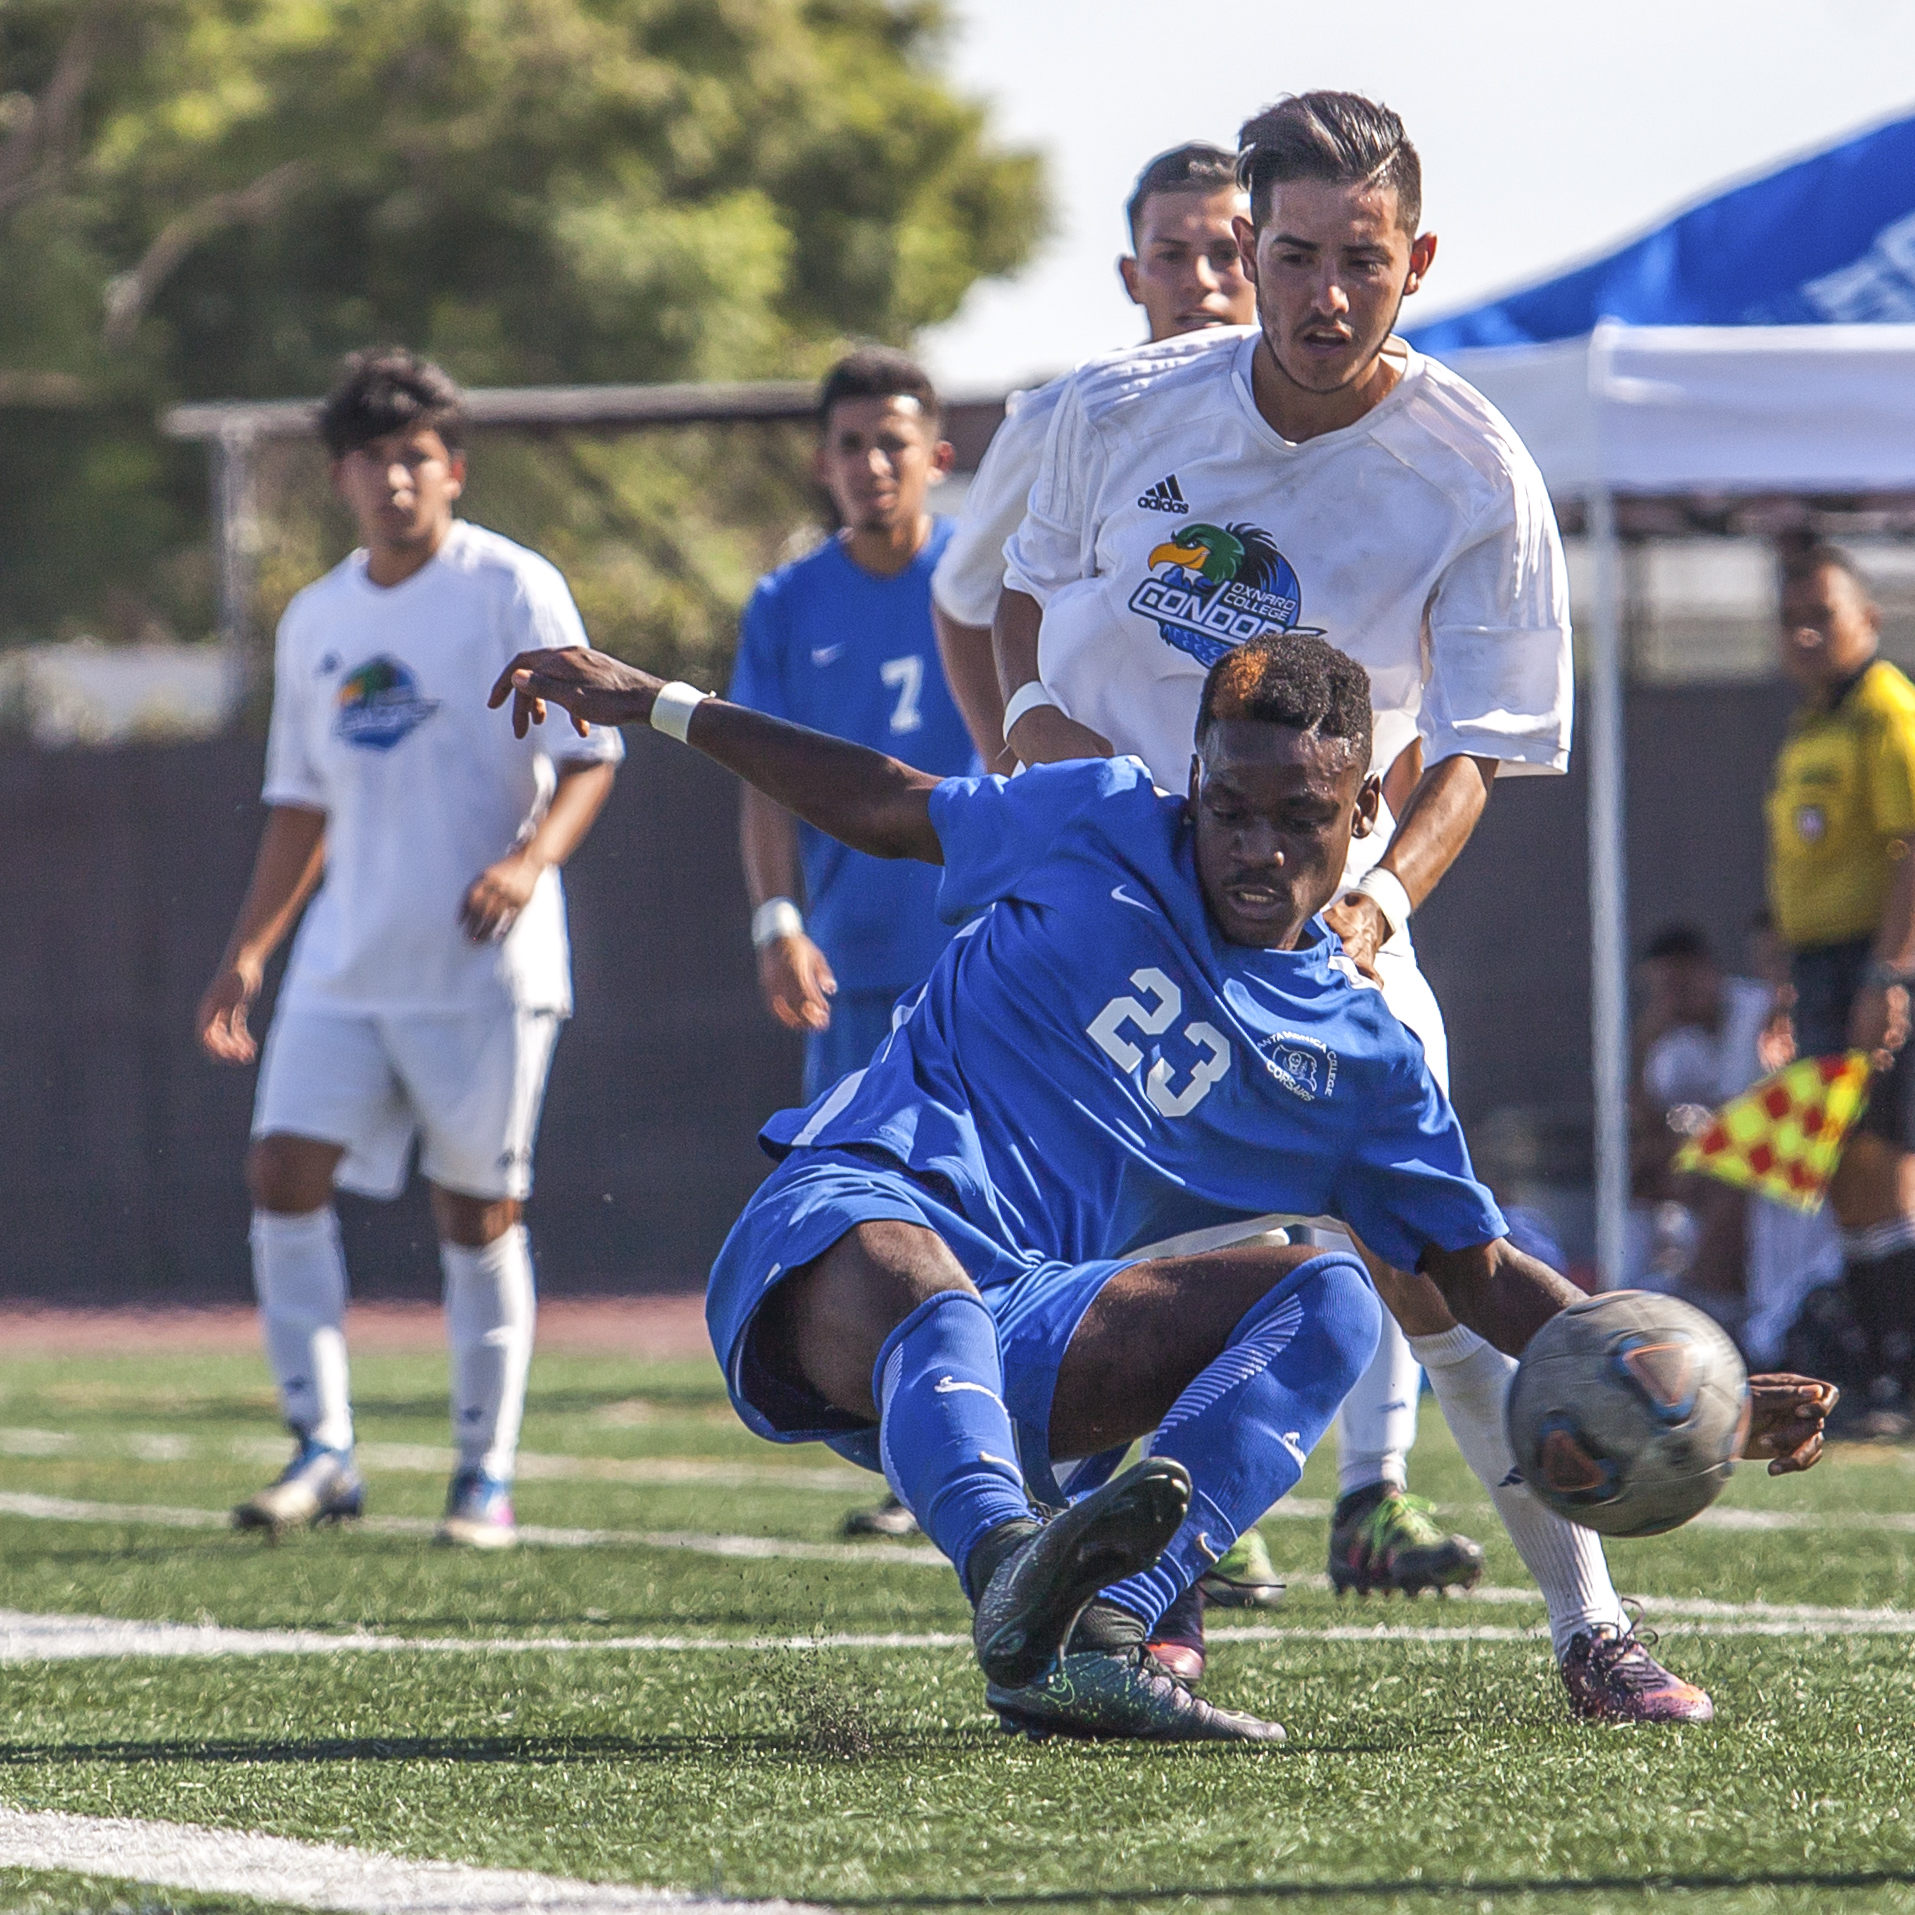  Divine Sumbu (23) of the Santa Monica College knocks out the ball from Luis Rivera (10) of Oxnard College.  On October 17, 2017 the Santa Monica College Corsairs won the game 2-0 against the Oxnard College. The match was held at the Corsair Stadium 